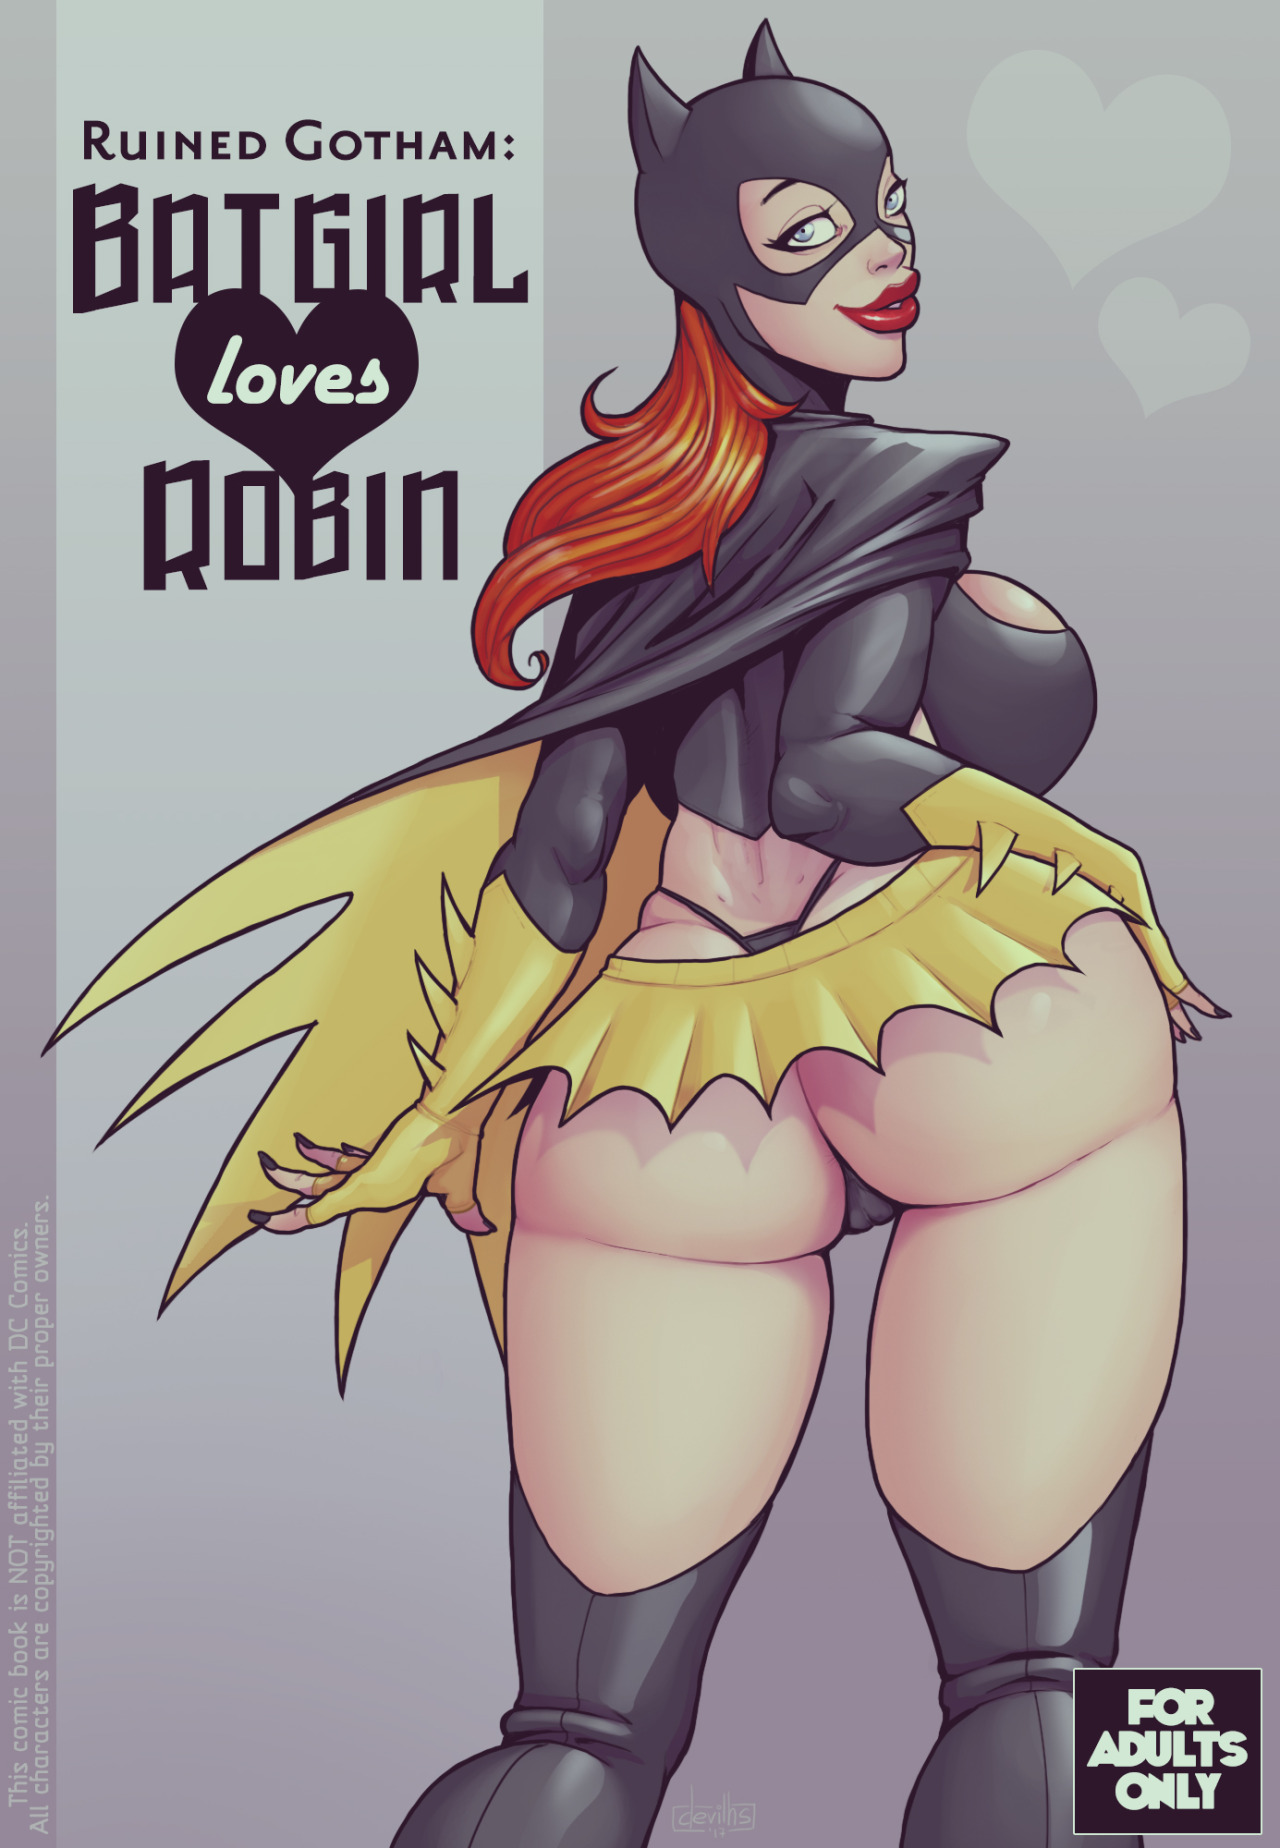 Updated comic by DevilHS - Ruined Gotham Batgirl loves Robin - 43 pages - Ongoing